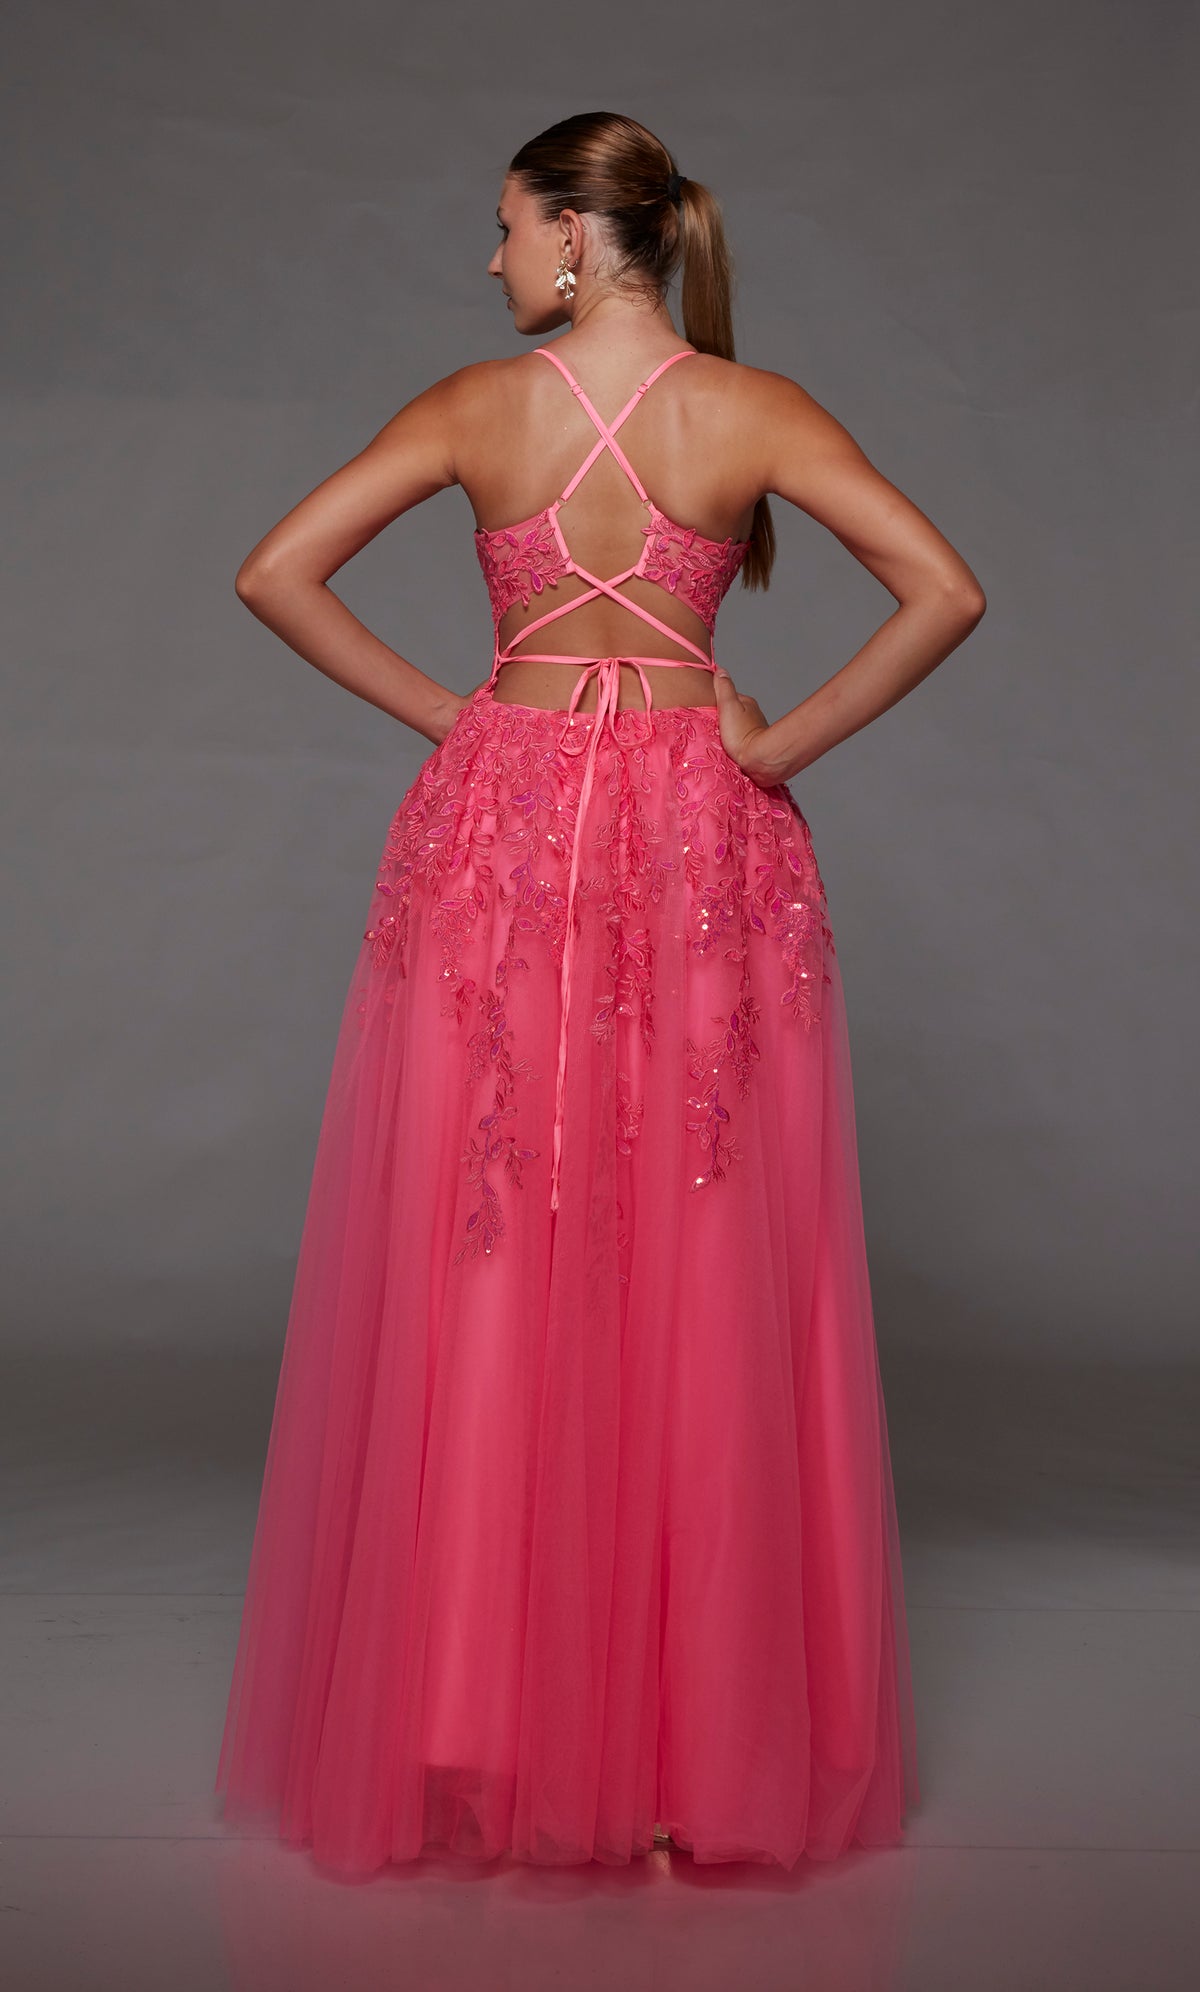 Pink prom dress: sheer corset bodice, full tulle skirt with front slit, lace-up back, and intricate floral lace appliques for an enchanting look.